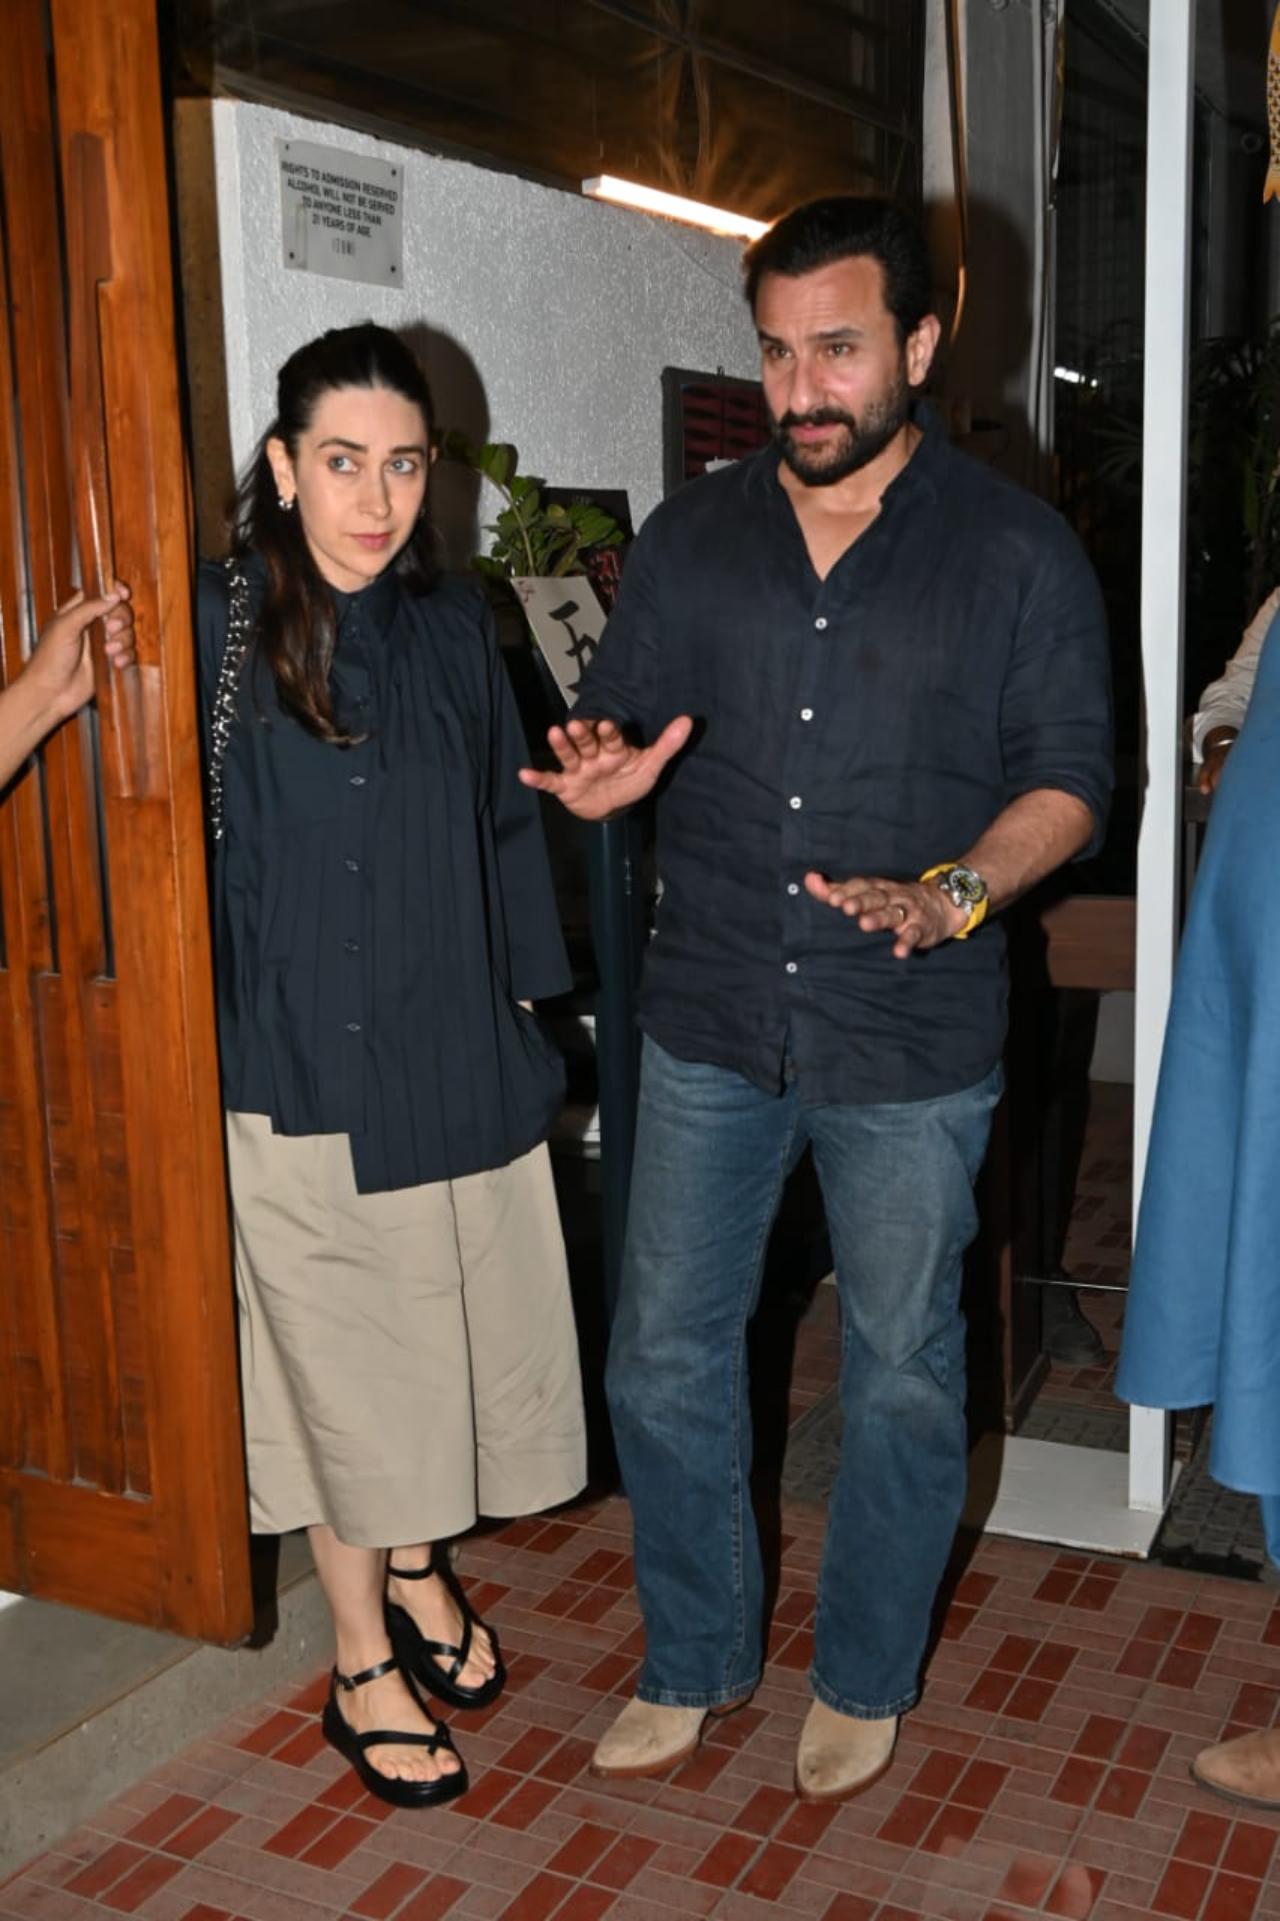 Kareena Kapoor Khan and Saif Ali Khan spent Friday night in the best way. The duo went for a family dinner in Mumbai with sister Karisma Kapoor and uncle Kunal Kapoor